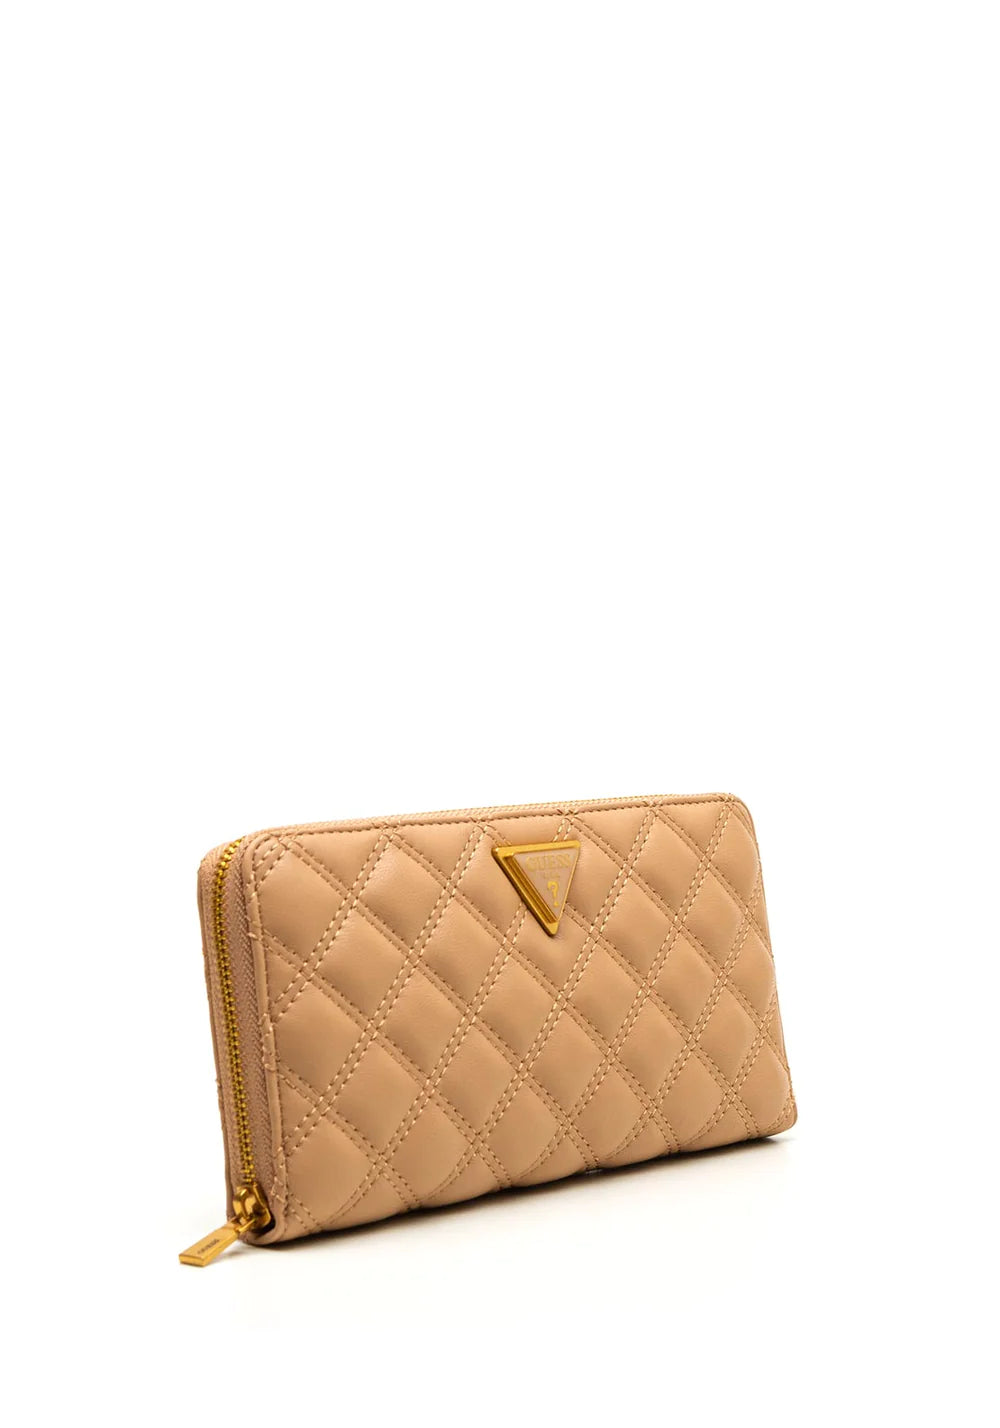 Guess Giully Large Quilted Zip Around Wallet, Beige